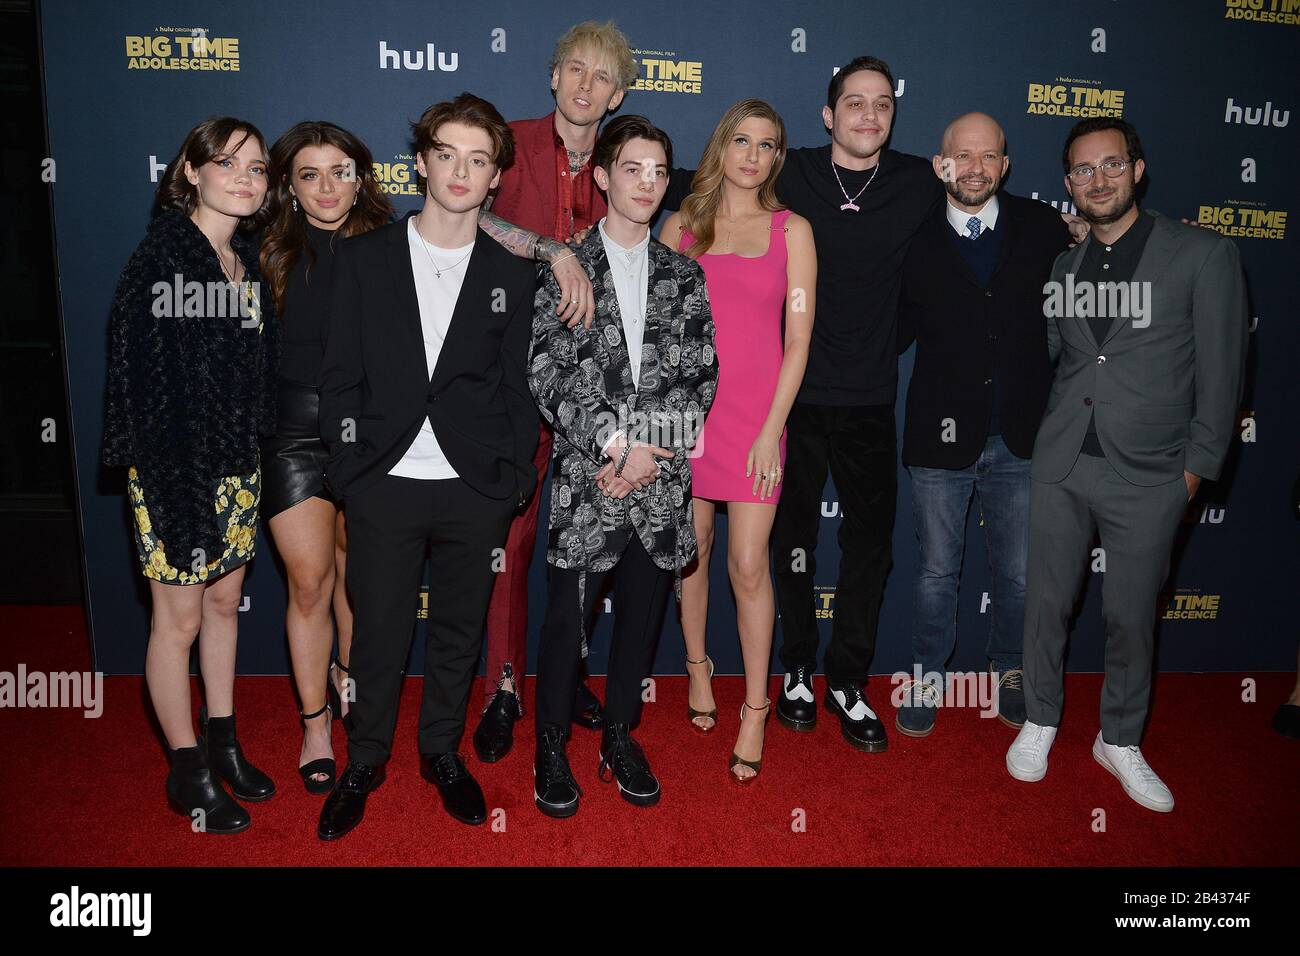 New York, USA. 05th Mar, 2020. (L-R) Oona Laurence, Brielle Barbusca, Thomas Barbusca, Colson Baker AKA Machine Gun Kelly, Griffin Gluck, Emily Arlook, Pete Davidson, Jon Cryer and Joason Orley attend the premiere of Hulu's 'Big Time Adolescence' at Metrograph in New York, NY, March 5, 2020. (Photo by Anthony Behar/Sipa USA) Credit: Sipa USA/Alamy Live News Stock Photo